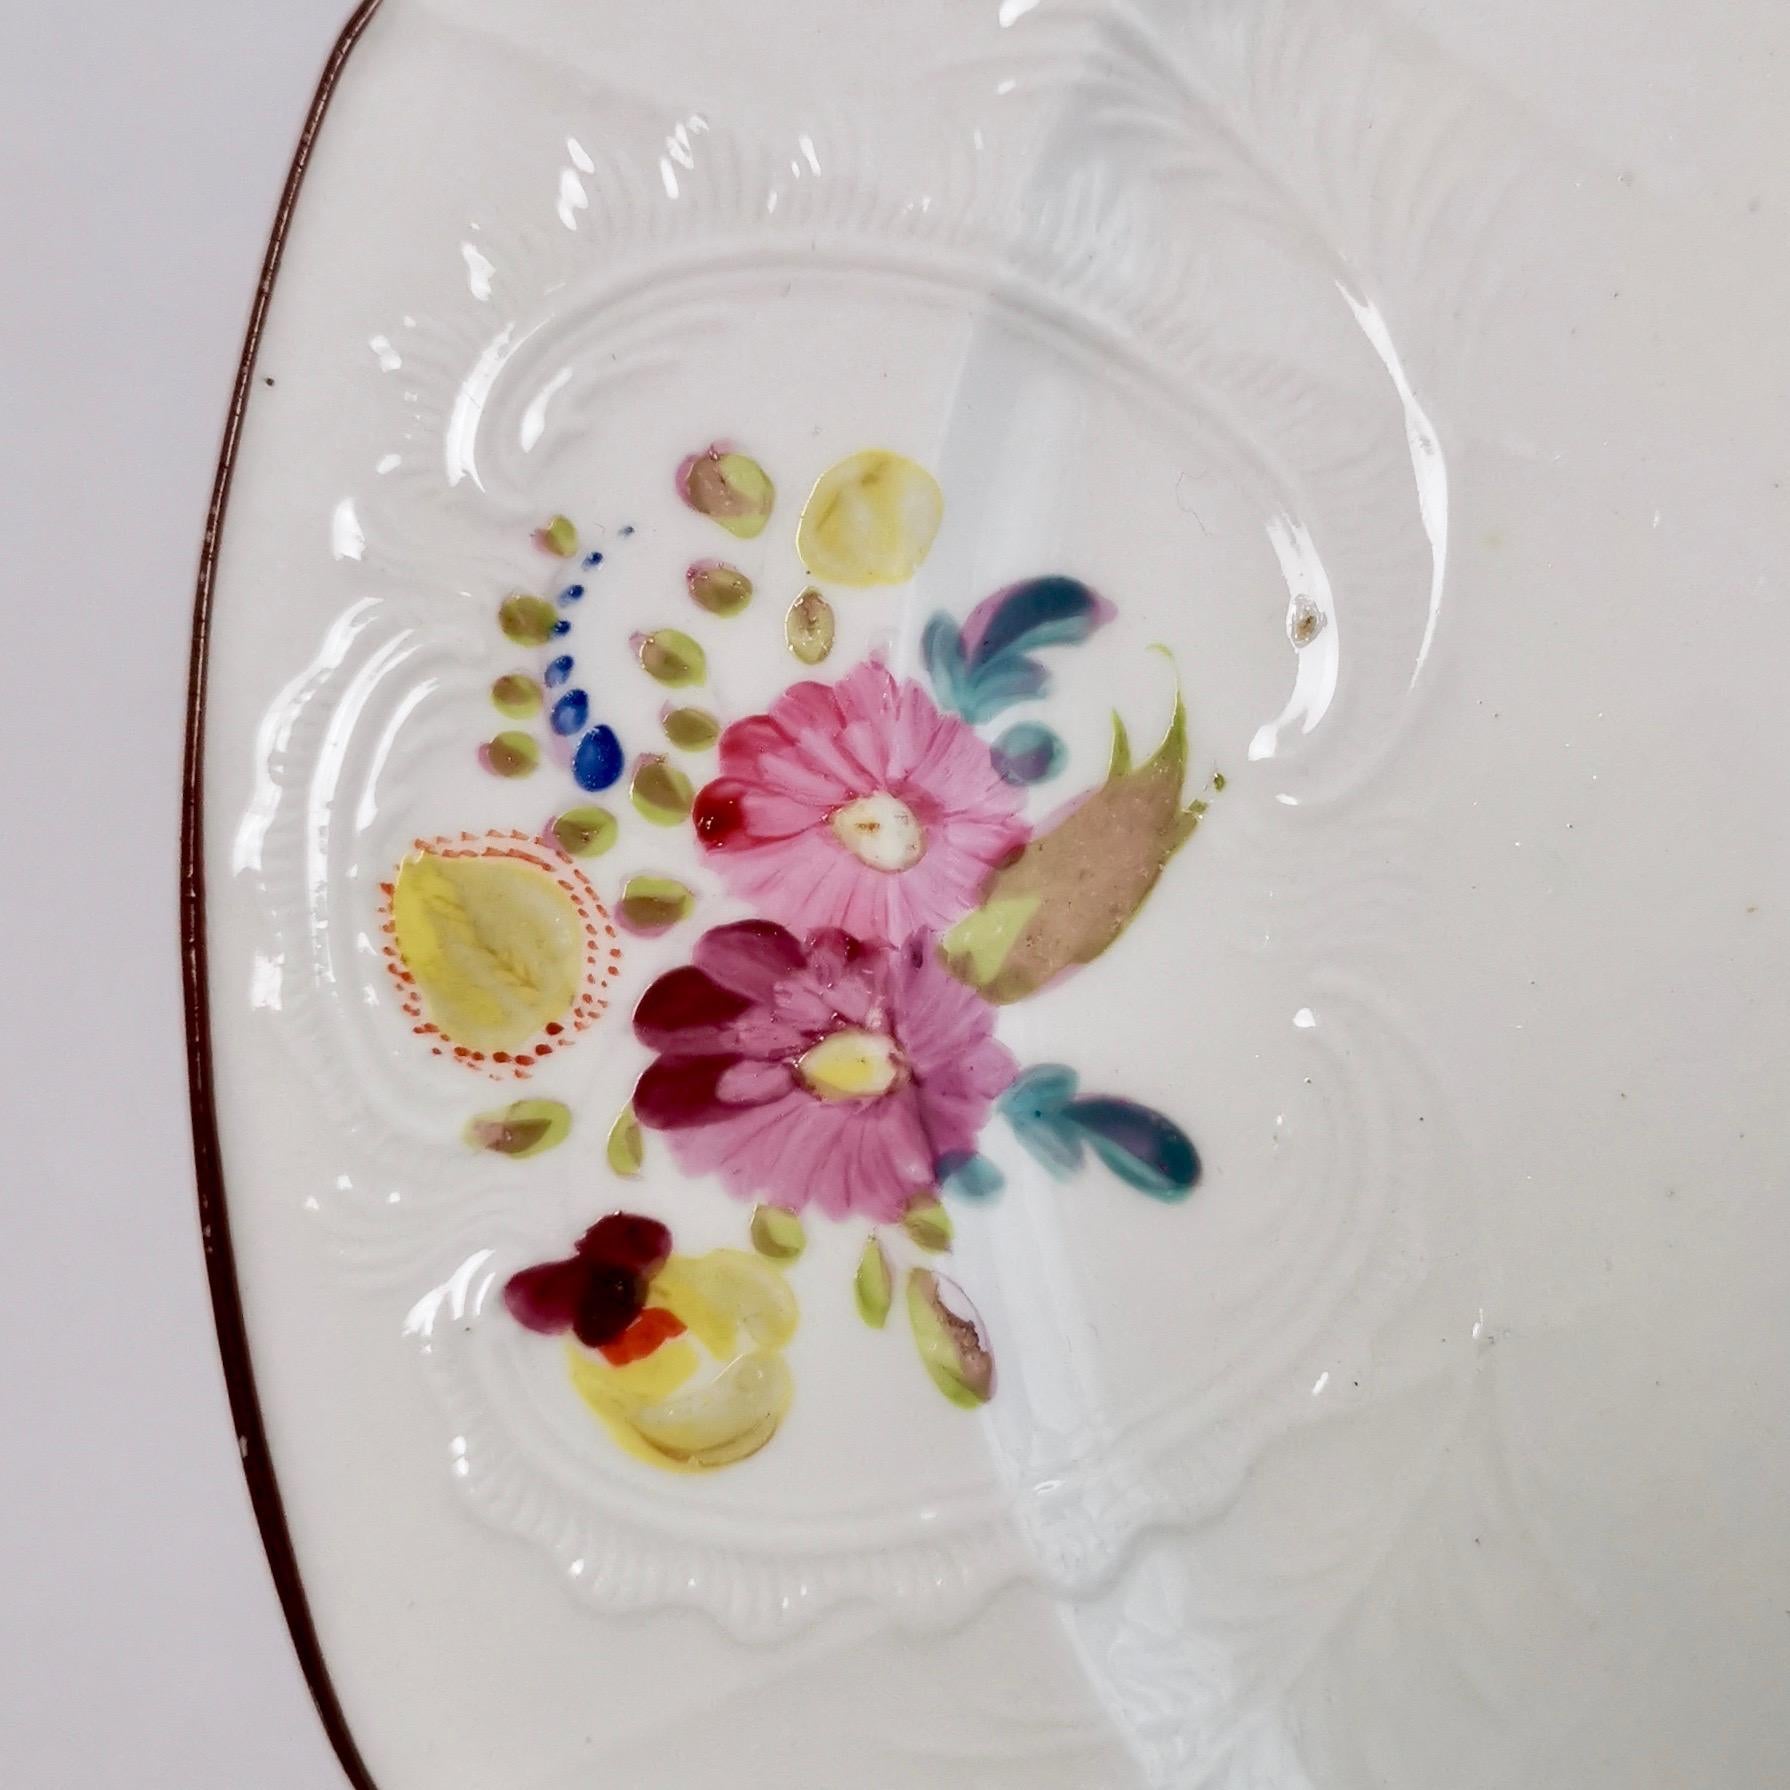 Coalport John Rose Porcelain Plate, White Floral Dulong Blind-Moulded circa 1815 In Good Condition For Sale In London, GB